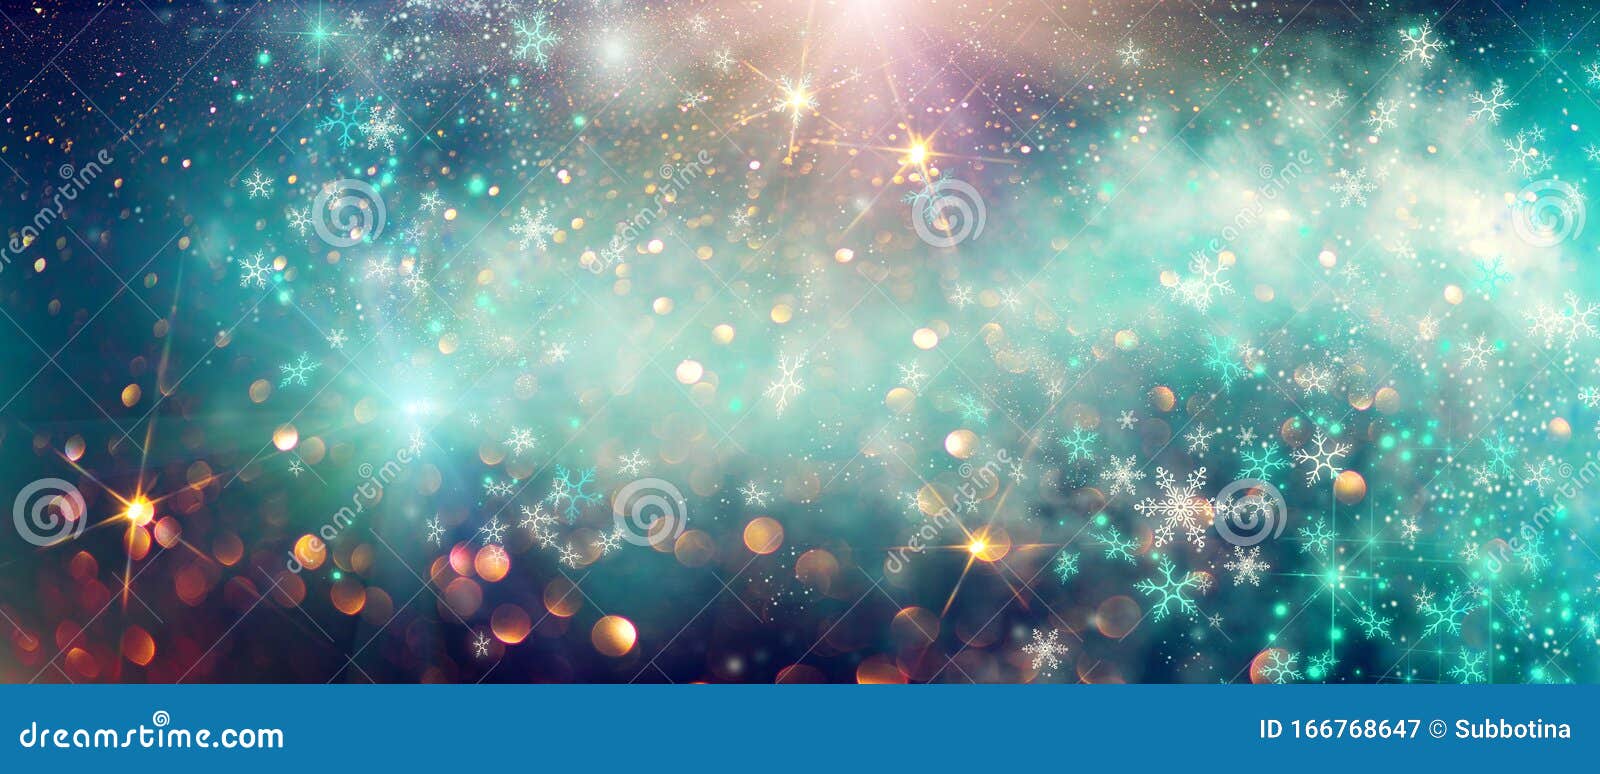 winter christmas and new year glittering snow flakes swirl bokeh background, backdrop with sparkling blue stars, holiday garland